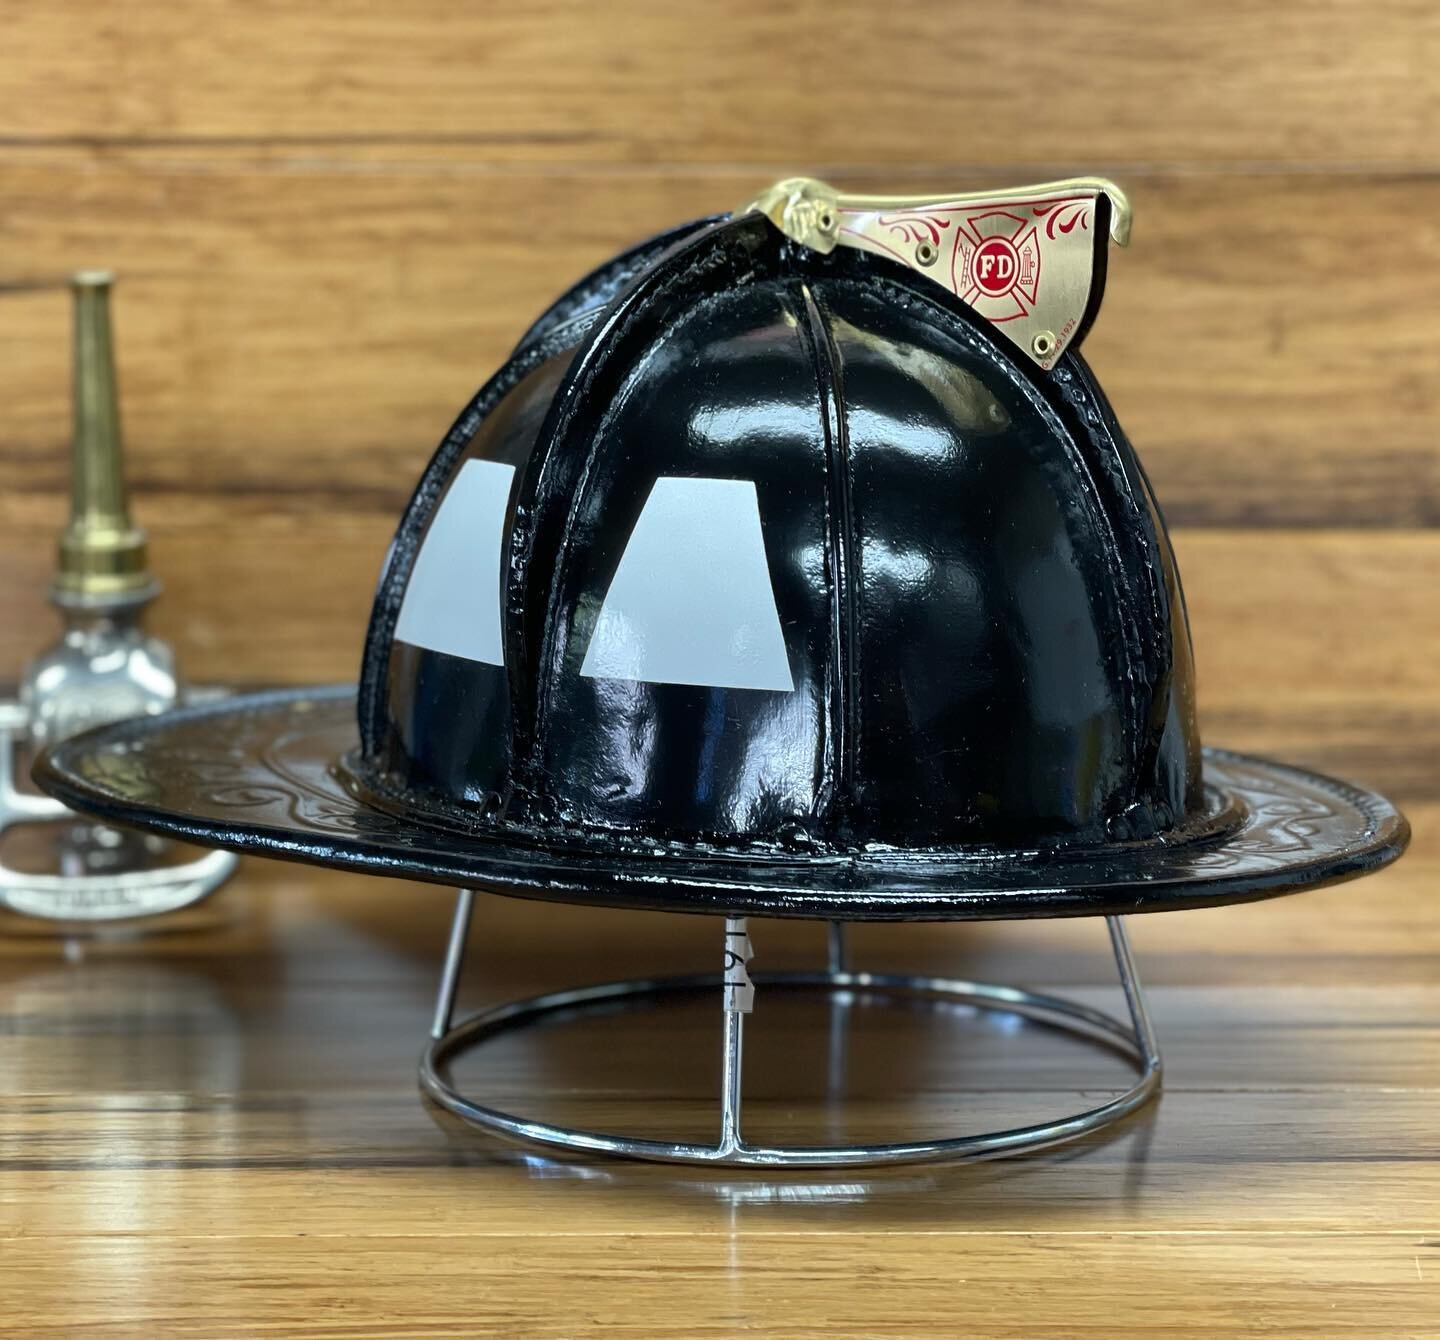 New Rekindles lids NFPA Offender build. Flat bend, retro brass, deep suspension, Rekindled lids short ear flaps, chin strap clips and fresh white tets. 

Hand crafted not produced.

 Rekindledlids.com

#leatherforever
#foreverleather 
#g5a
#firehelme